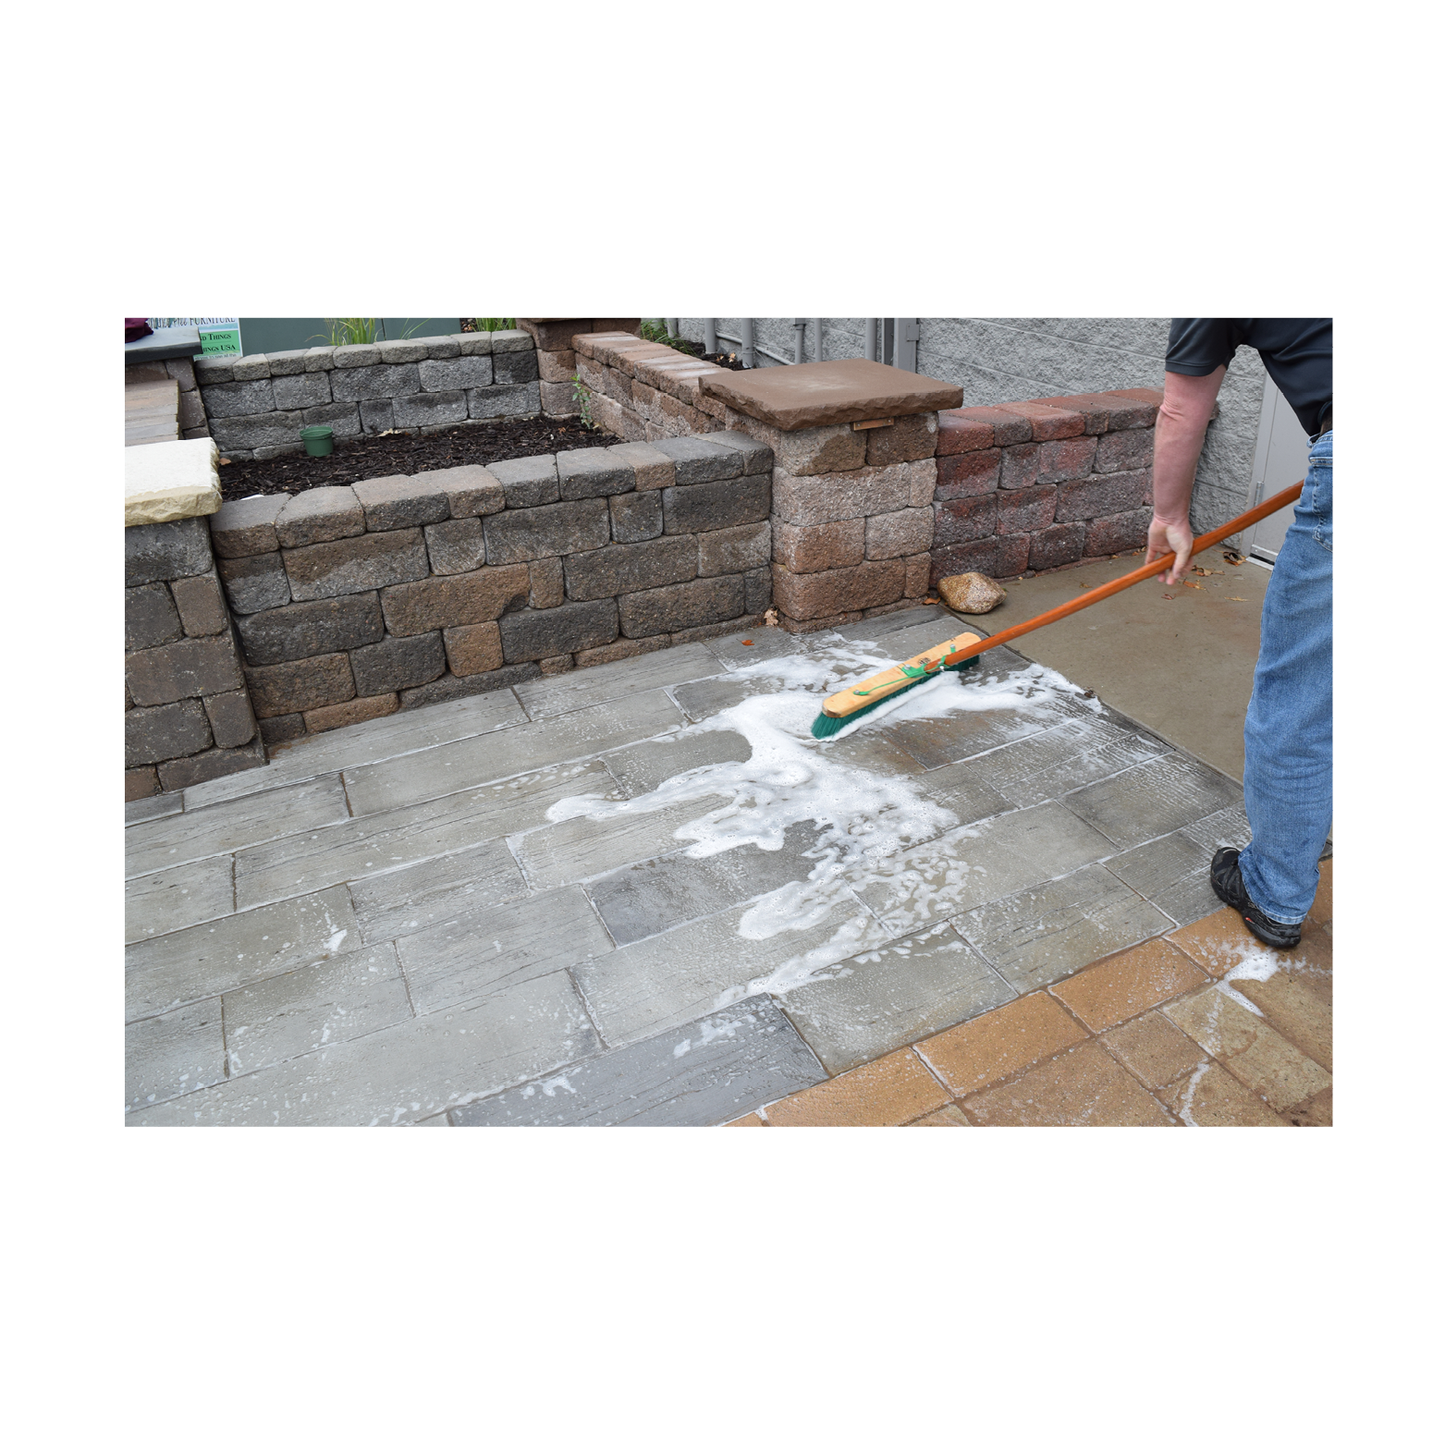 Scrubbing wetcast patio with cleaner